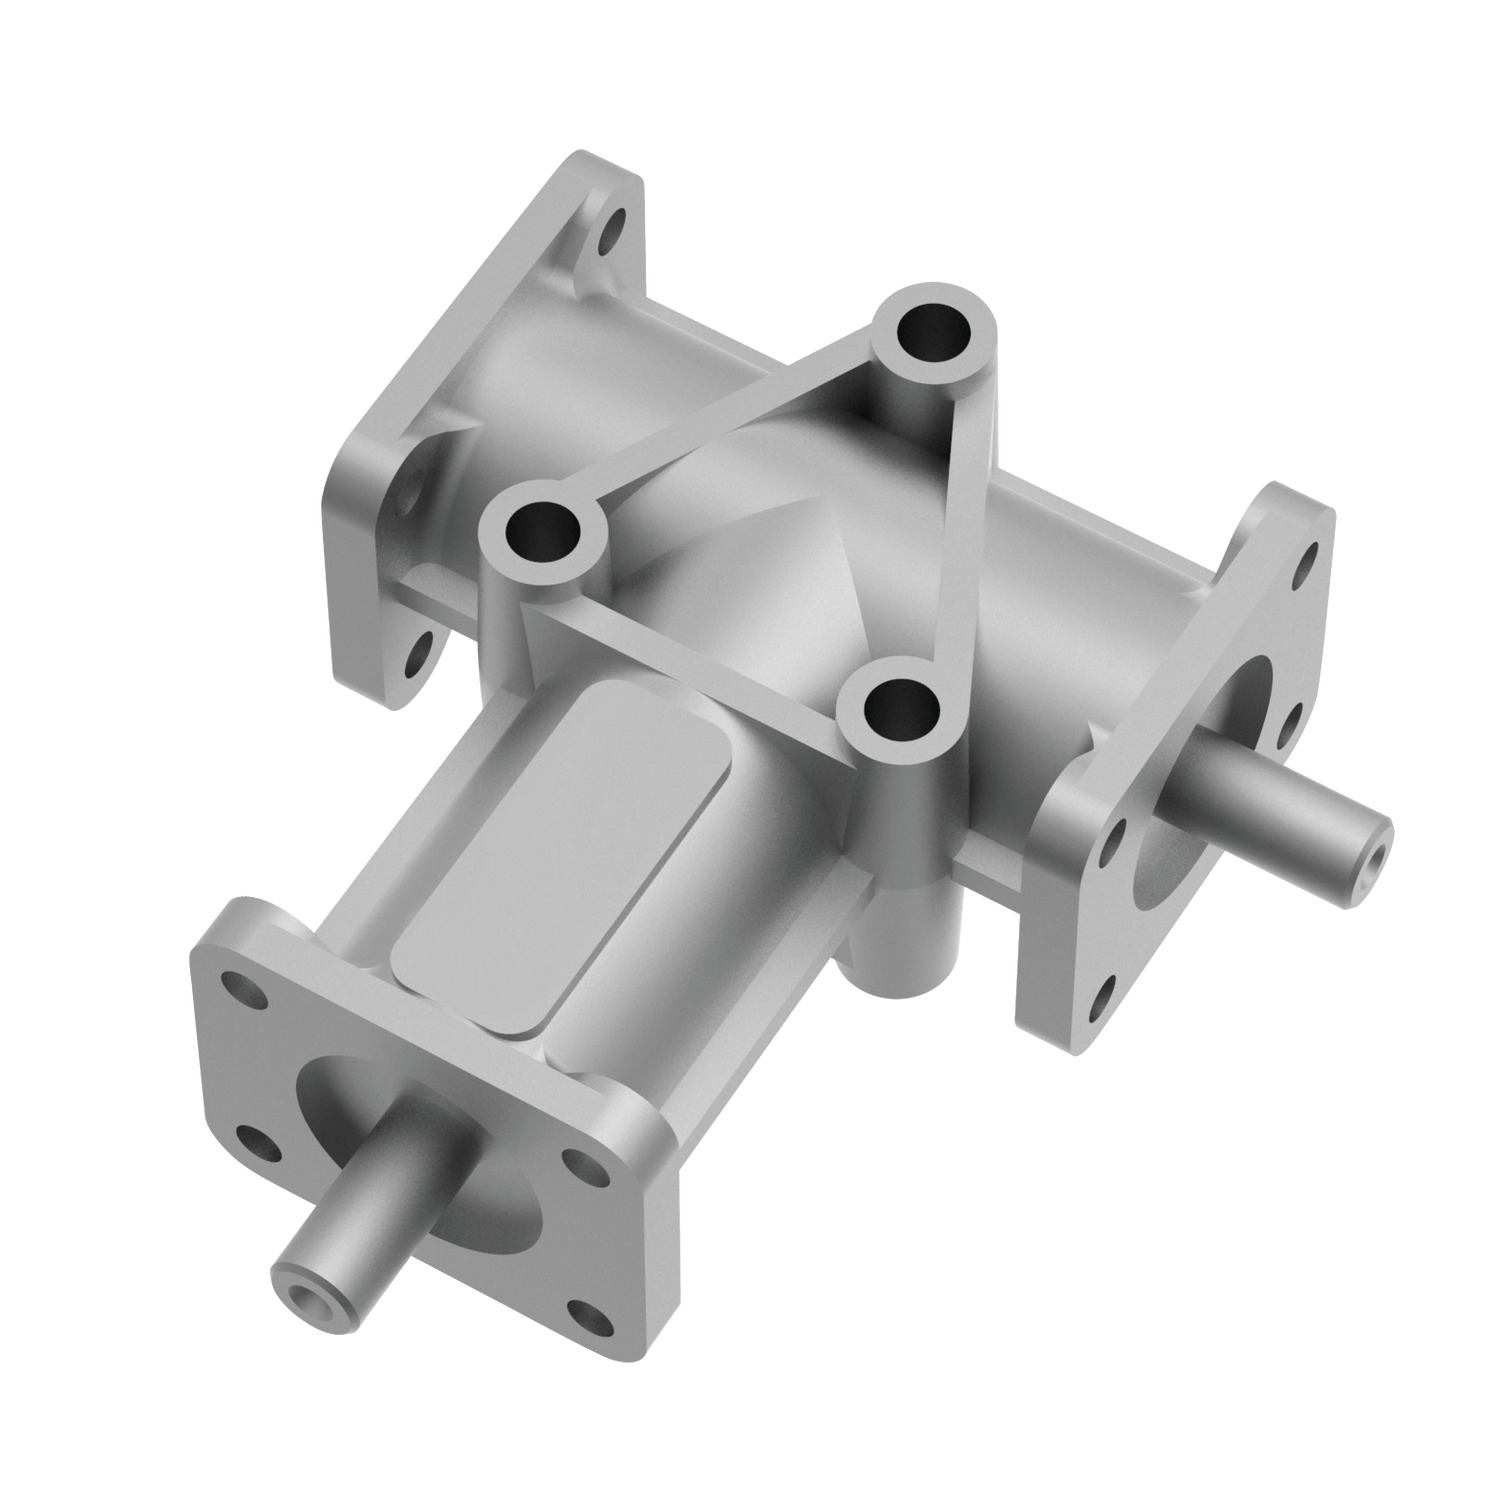 Two Shaft Gear Boxes Right angle two shaft gear boxes in lightweight aluminium alloy housing. Available in sizes up to Ø24.